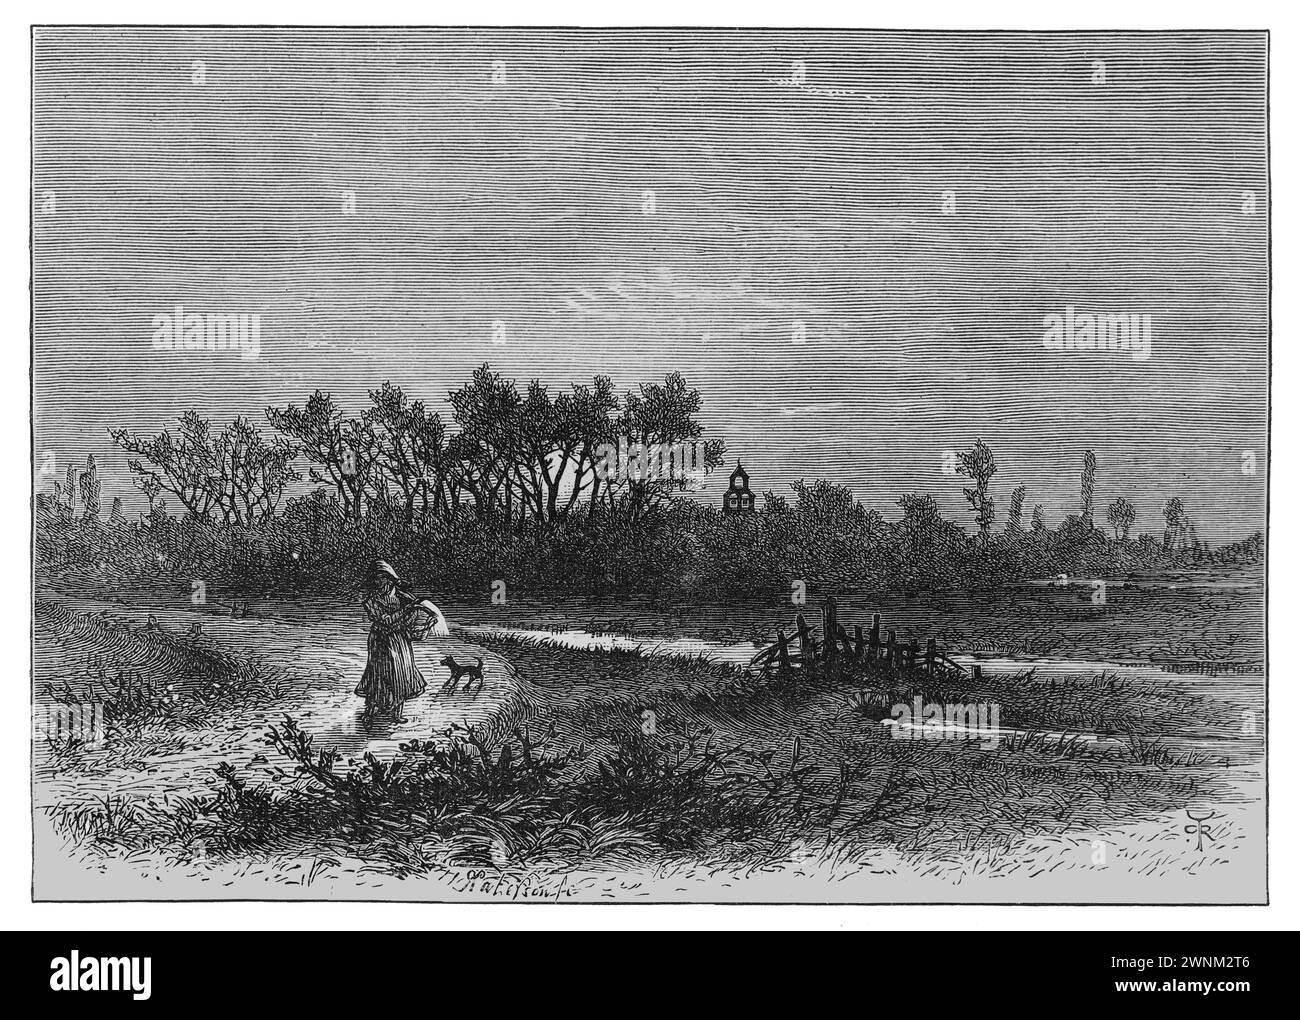 Peakirk viewed from the Maxey Cut. The bell cote of St Pega's church can be seen above the trees. 19th century; Black and white illustration from 'Our Own Country' a Descriptive, Historical and Pictorial guide to the UK published in late 1880s by Cassell, Petter, Galpin & Co. Historic pictures of Briatin. Stock Photo